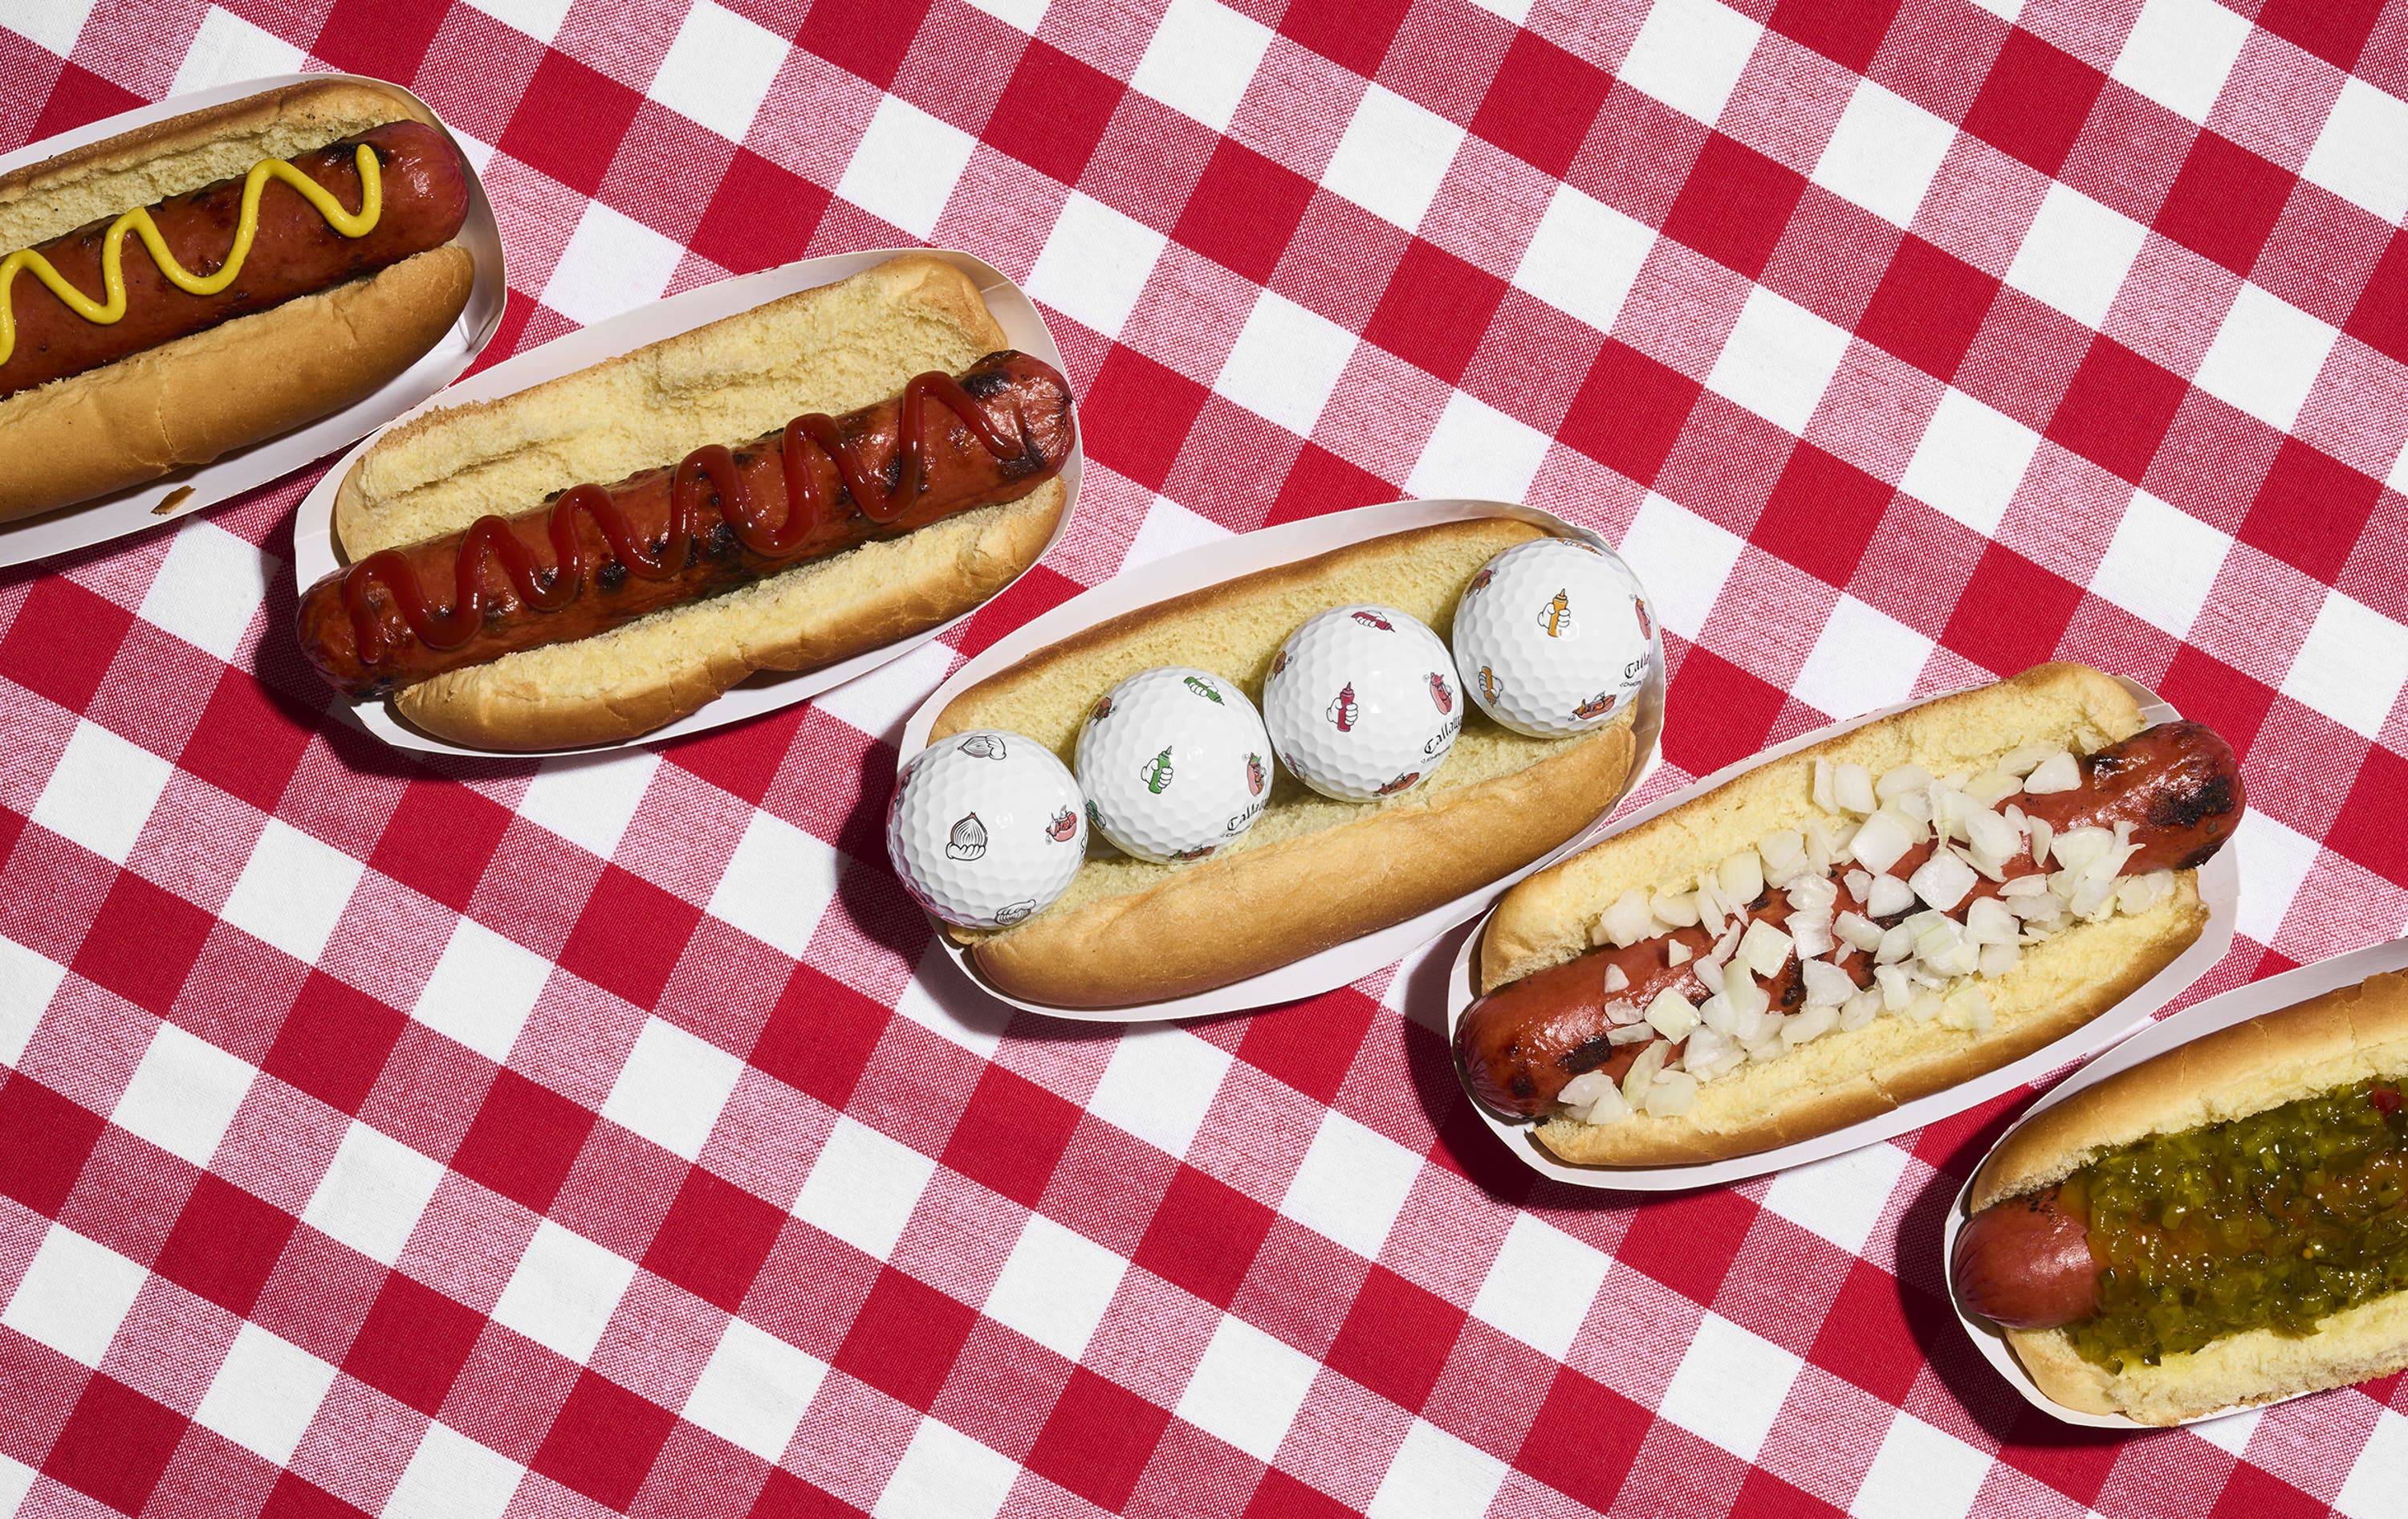 chrome tour golf balls with hot dog designs in a hot dog bun on a picnic table